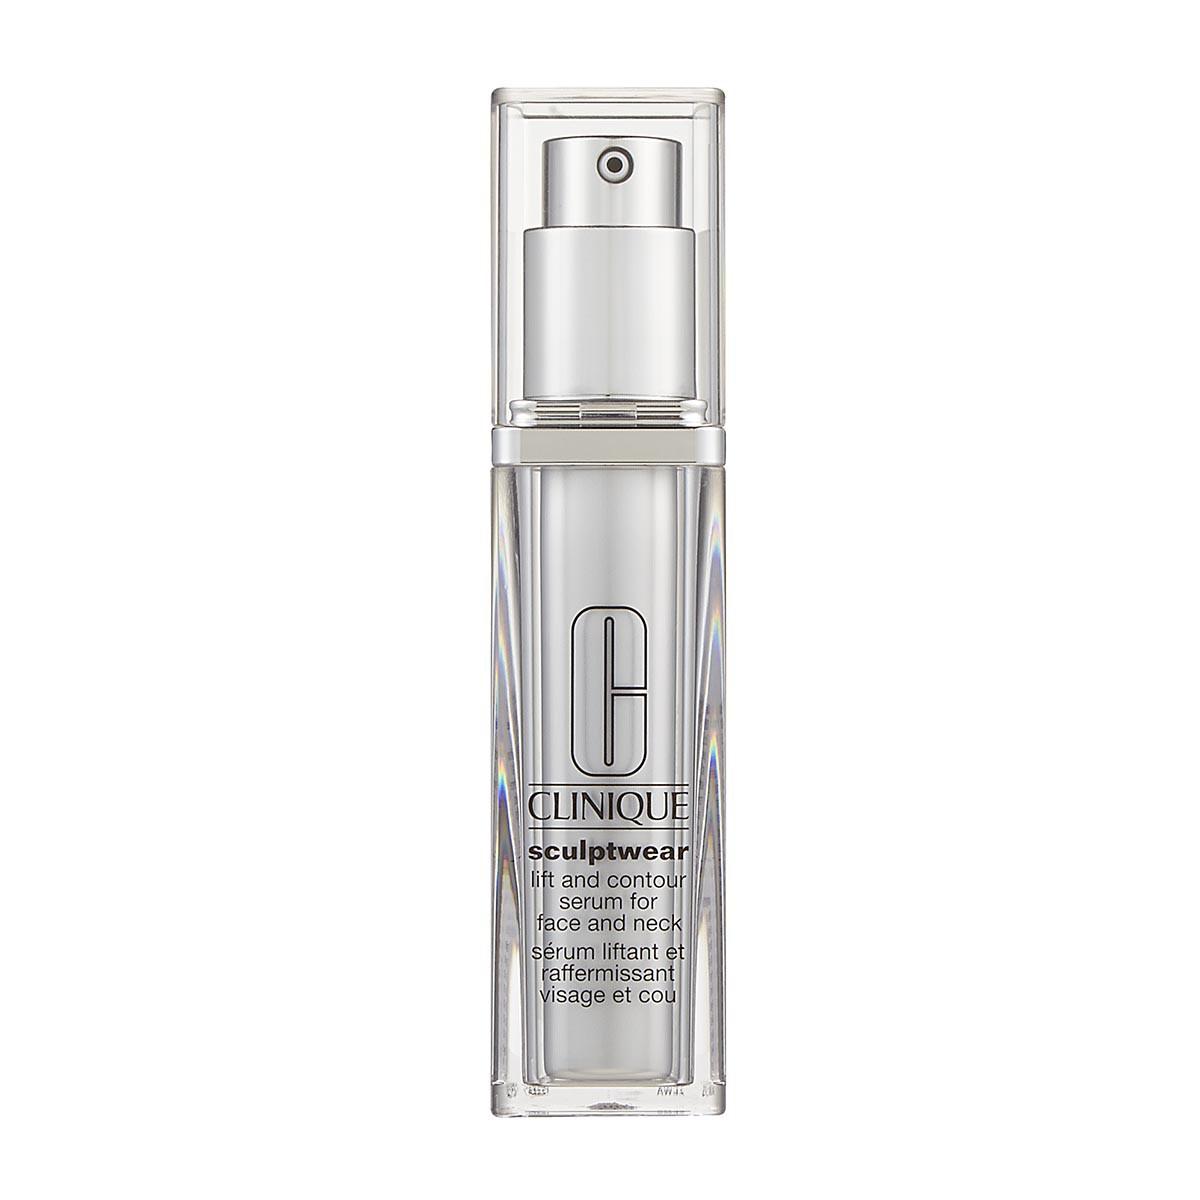 clinique-sculptwear-lift-and-contour-serum-for-face-and-neck-30ml